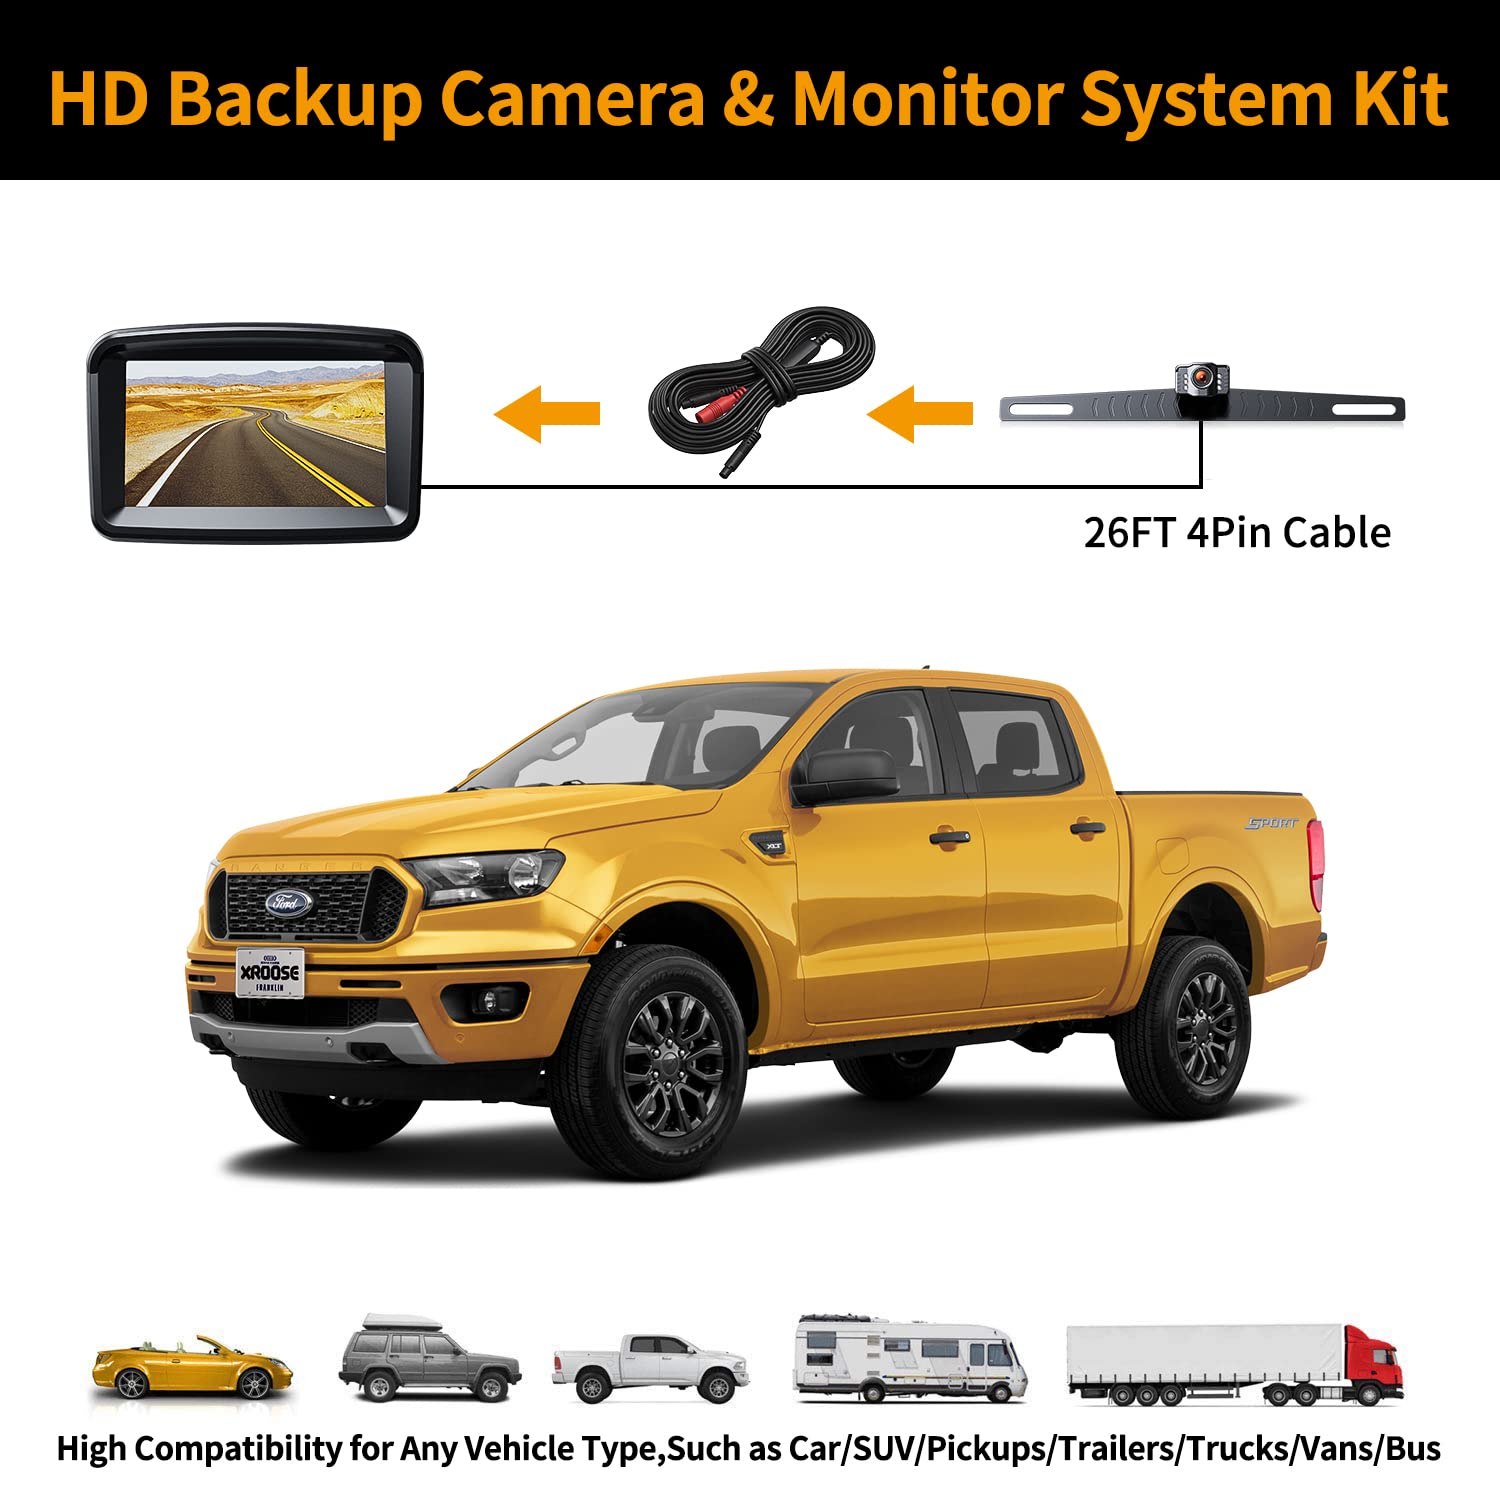 Backup Camera for Truck: 5''HD 1080P Front Rear View Monitor kit IP69 Waterproof Night Vision DIY Grid Lines for Car RVs Trucks Campers Bus Semi-Trailers Pickup Xroose S3